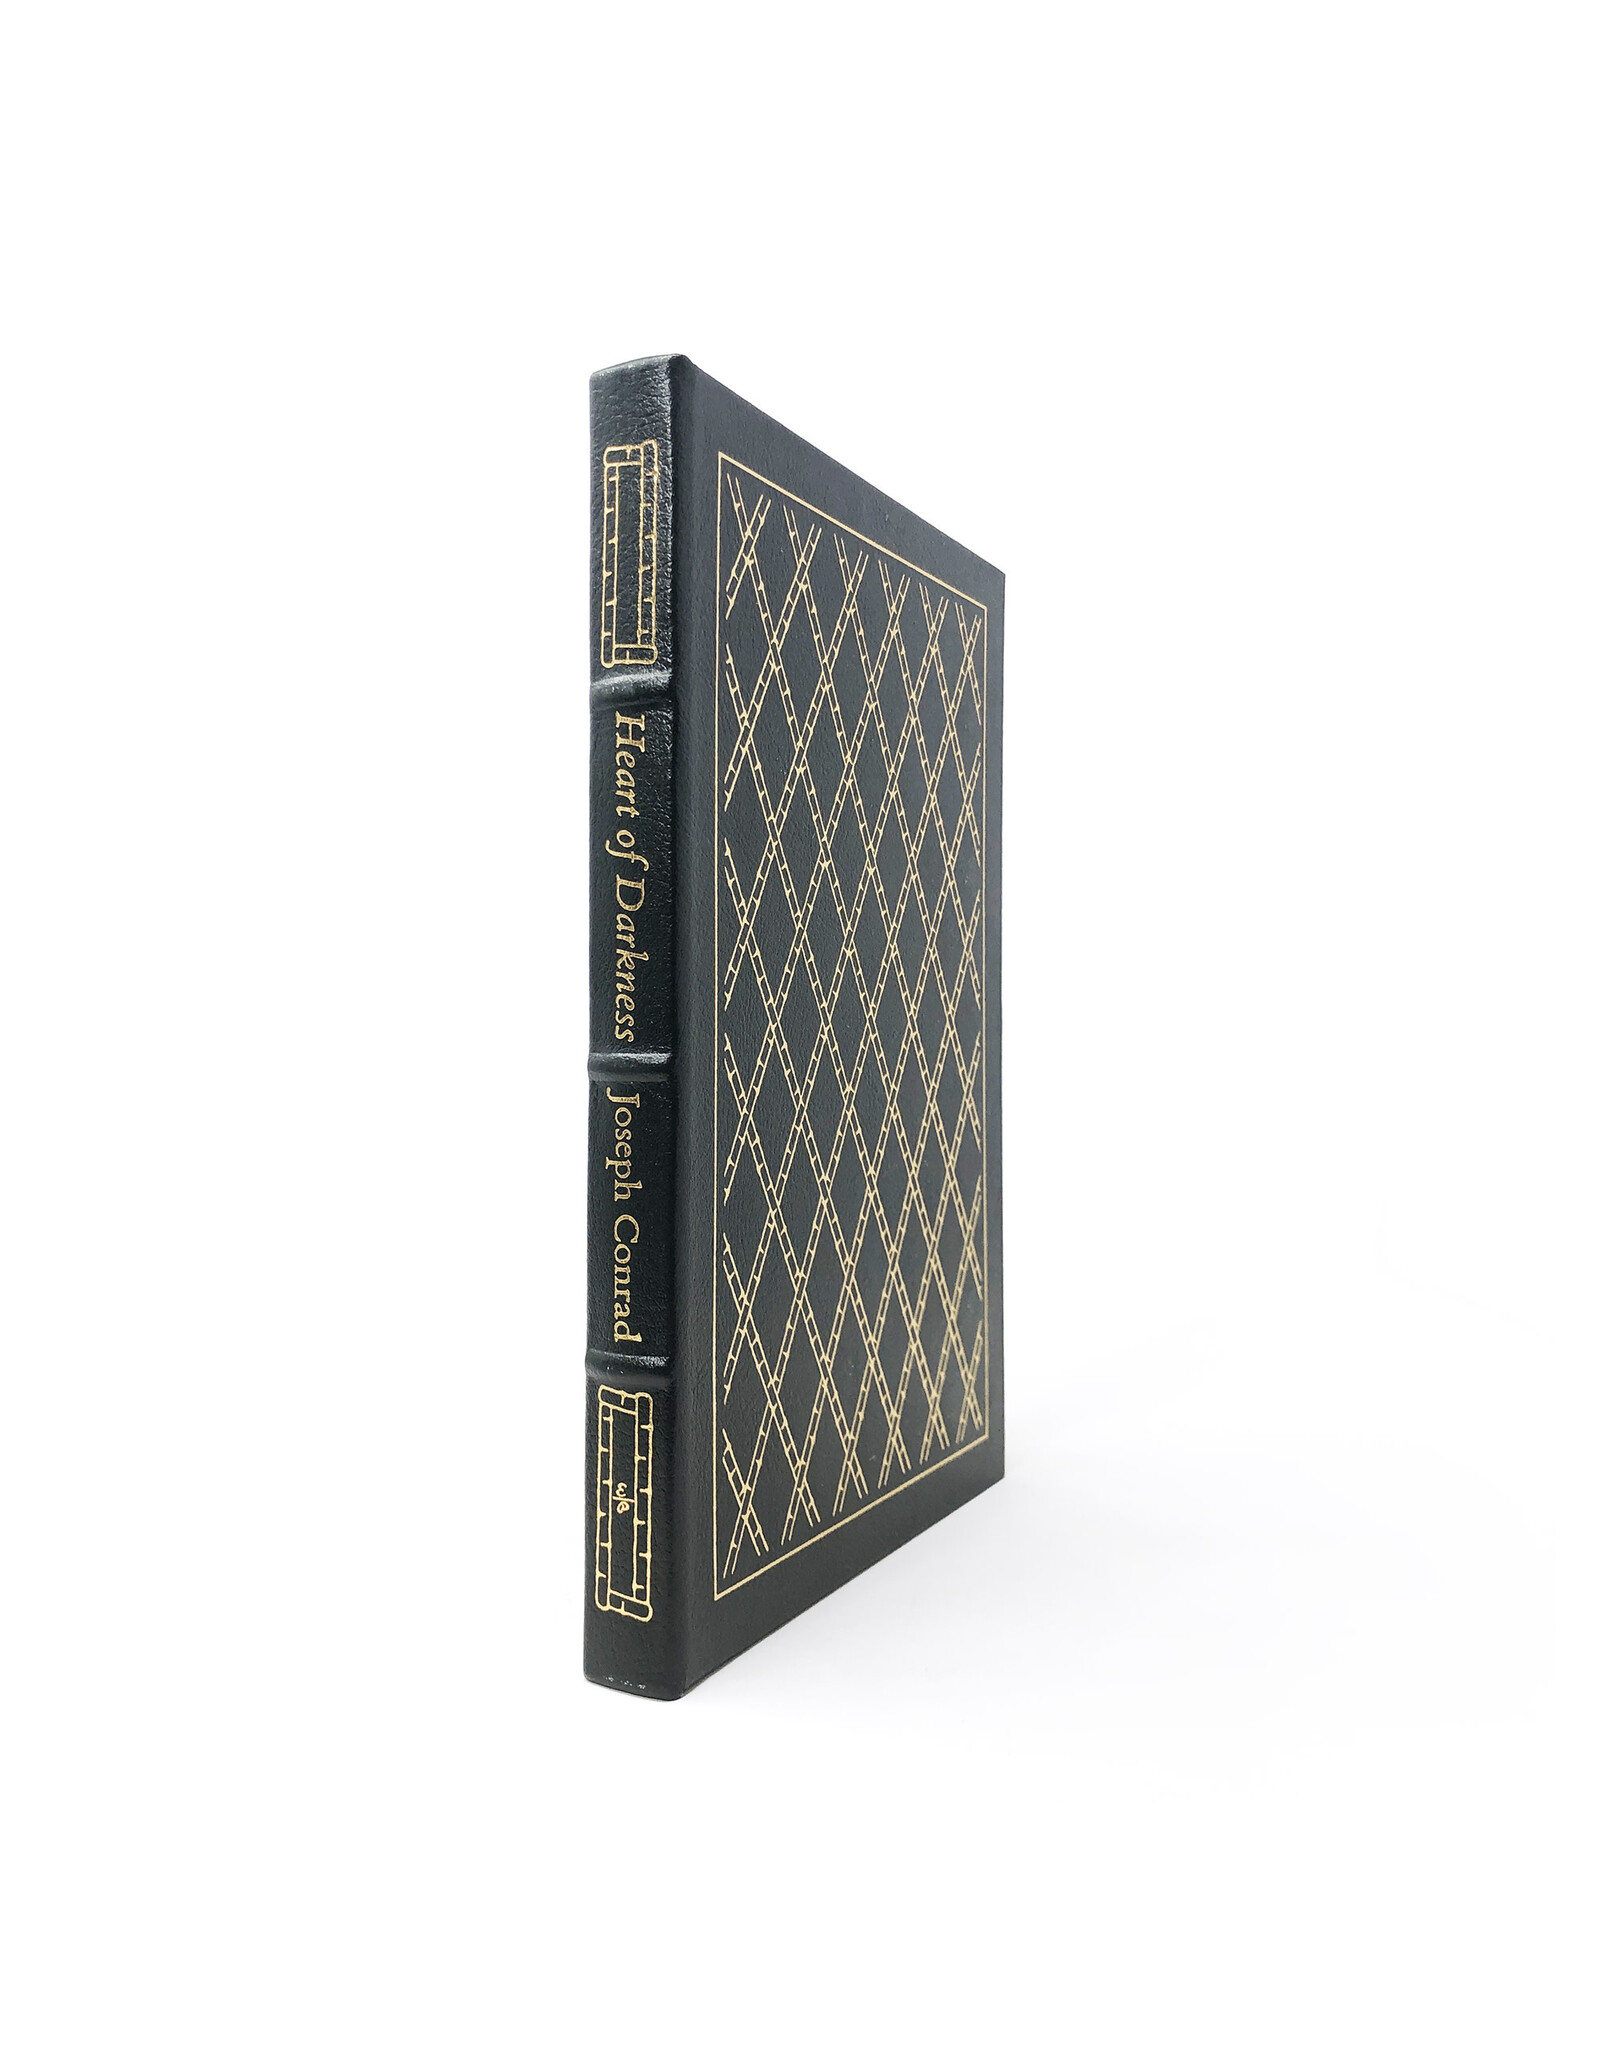 Easton Press Heart of Darkness 100 Greatest Books Ever Written Genuine Leather Collector's Edition